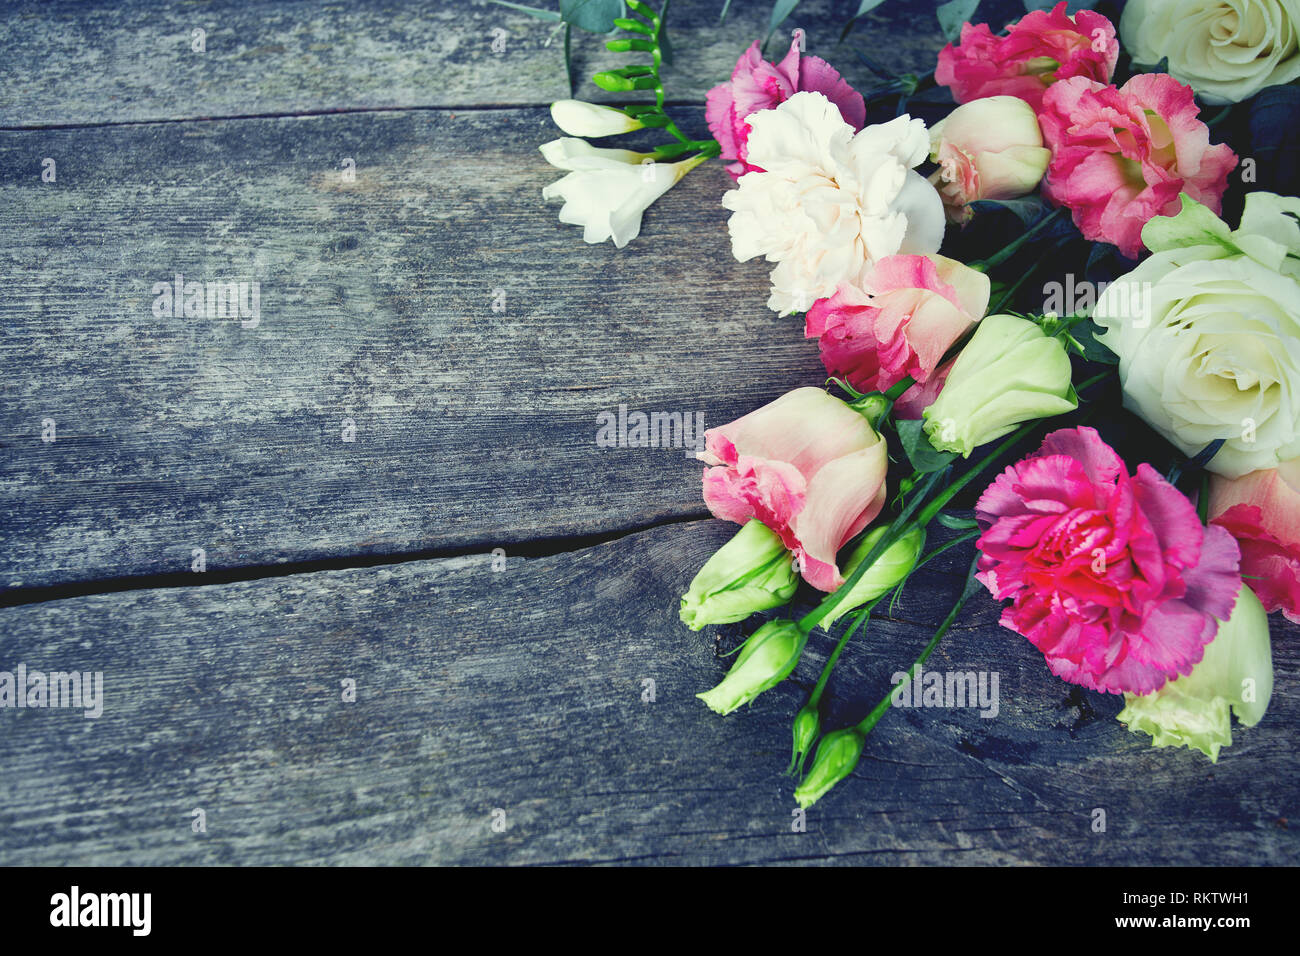 bouquet of beautiful flowers on wooden surface Stock Photo